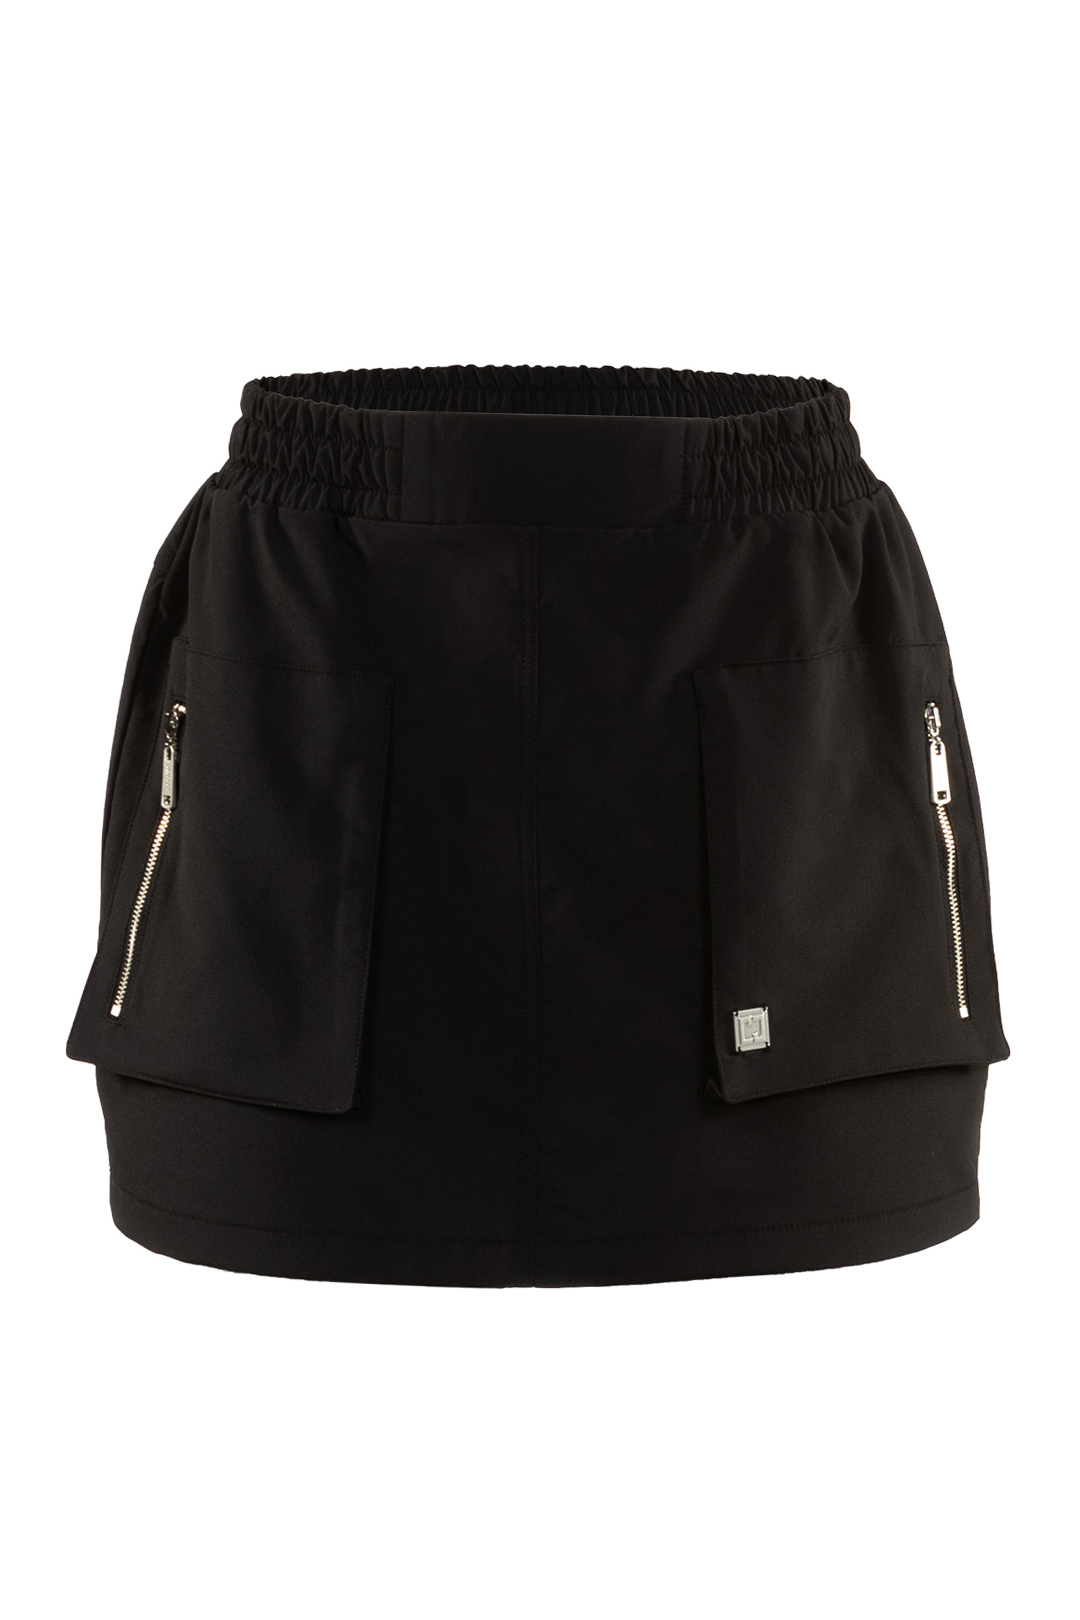 Short black skirt with applied pockets | Carrie